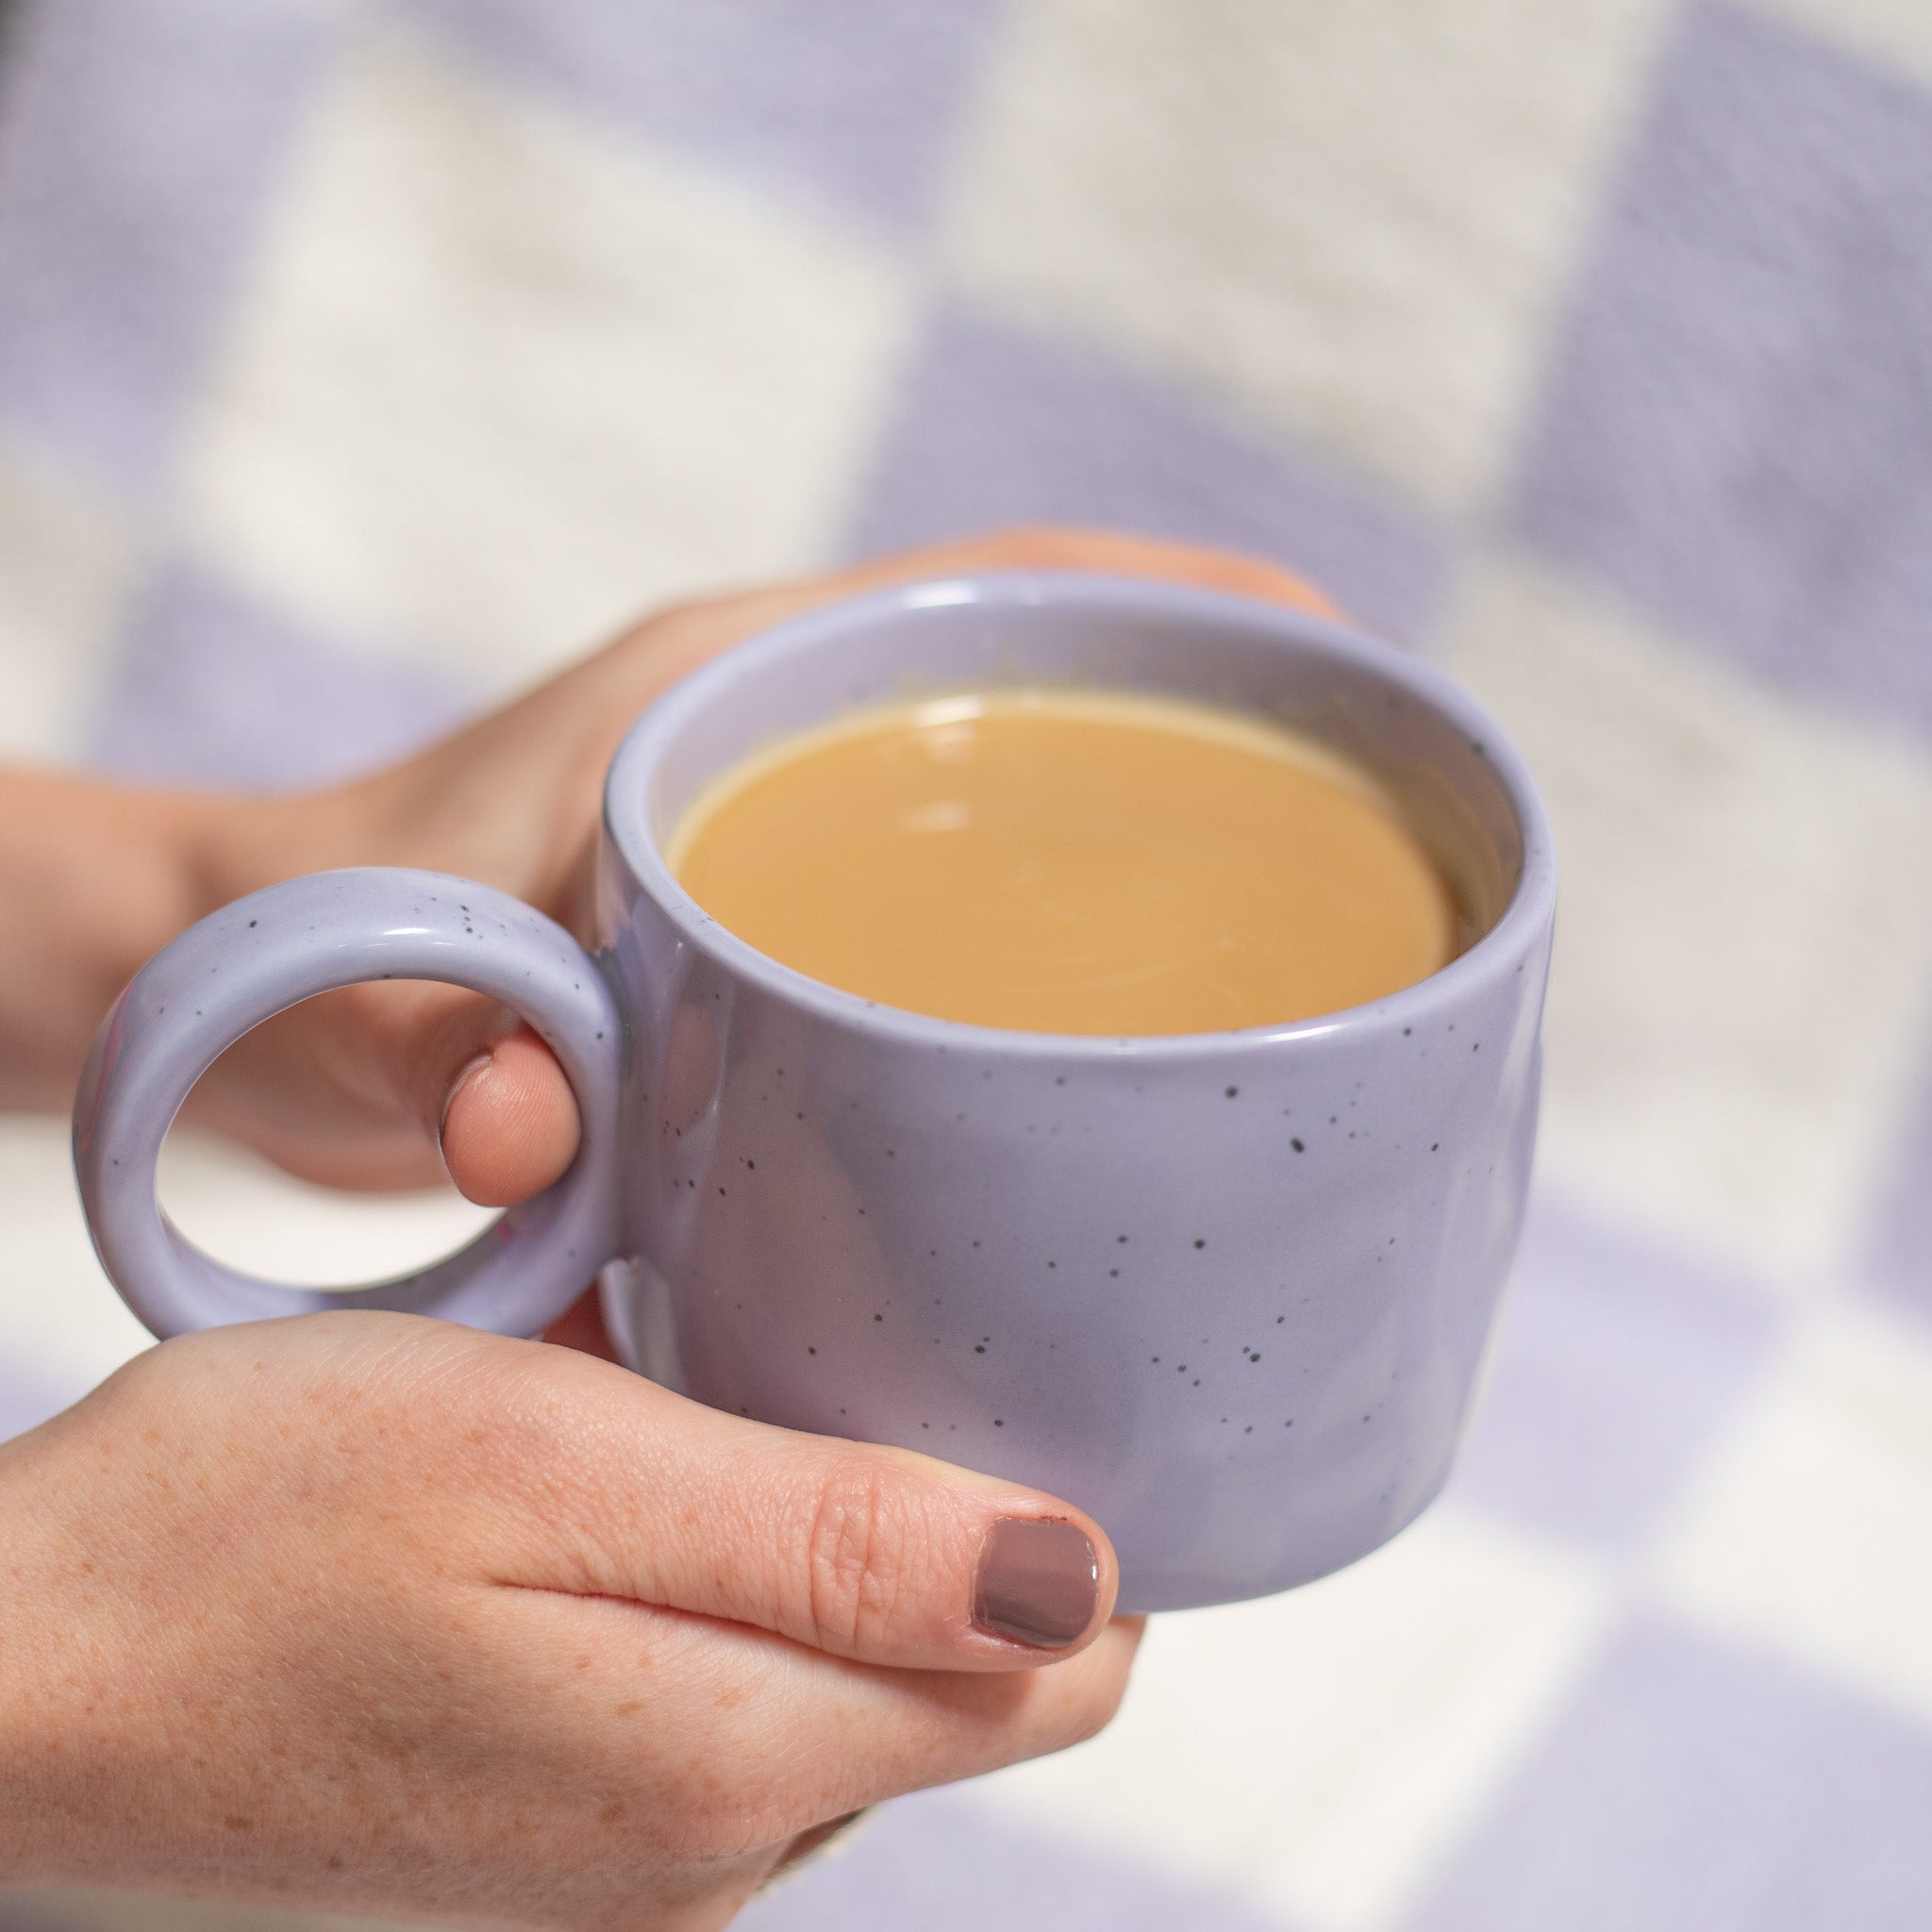 A woman's hands holding a Purple Speckled Nordic Mug over a purple and white checkered plush blanket.